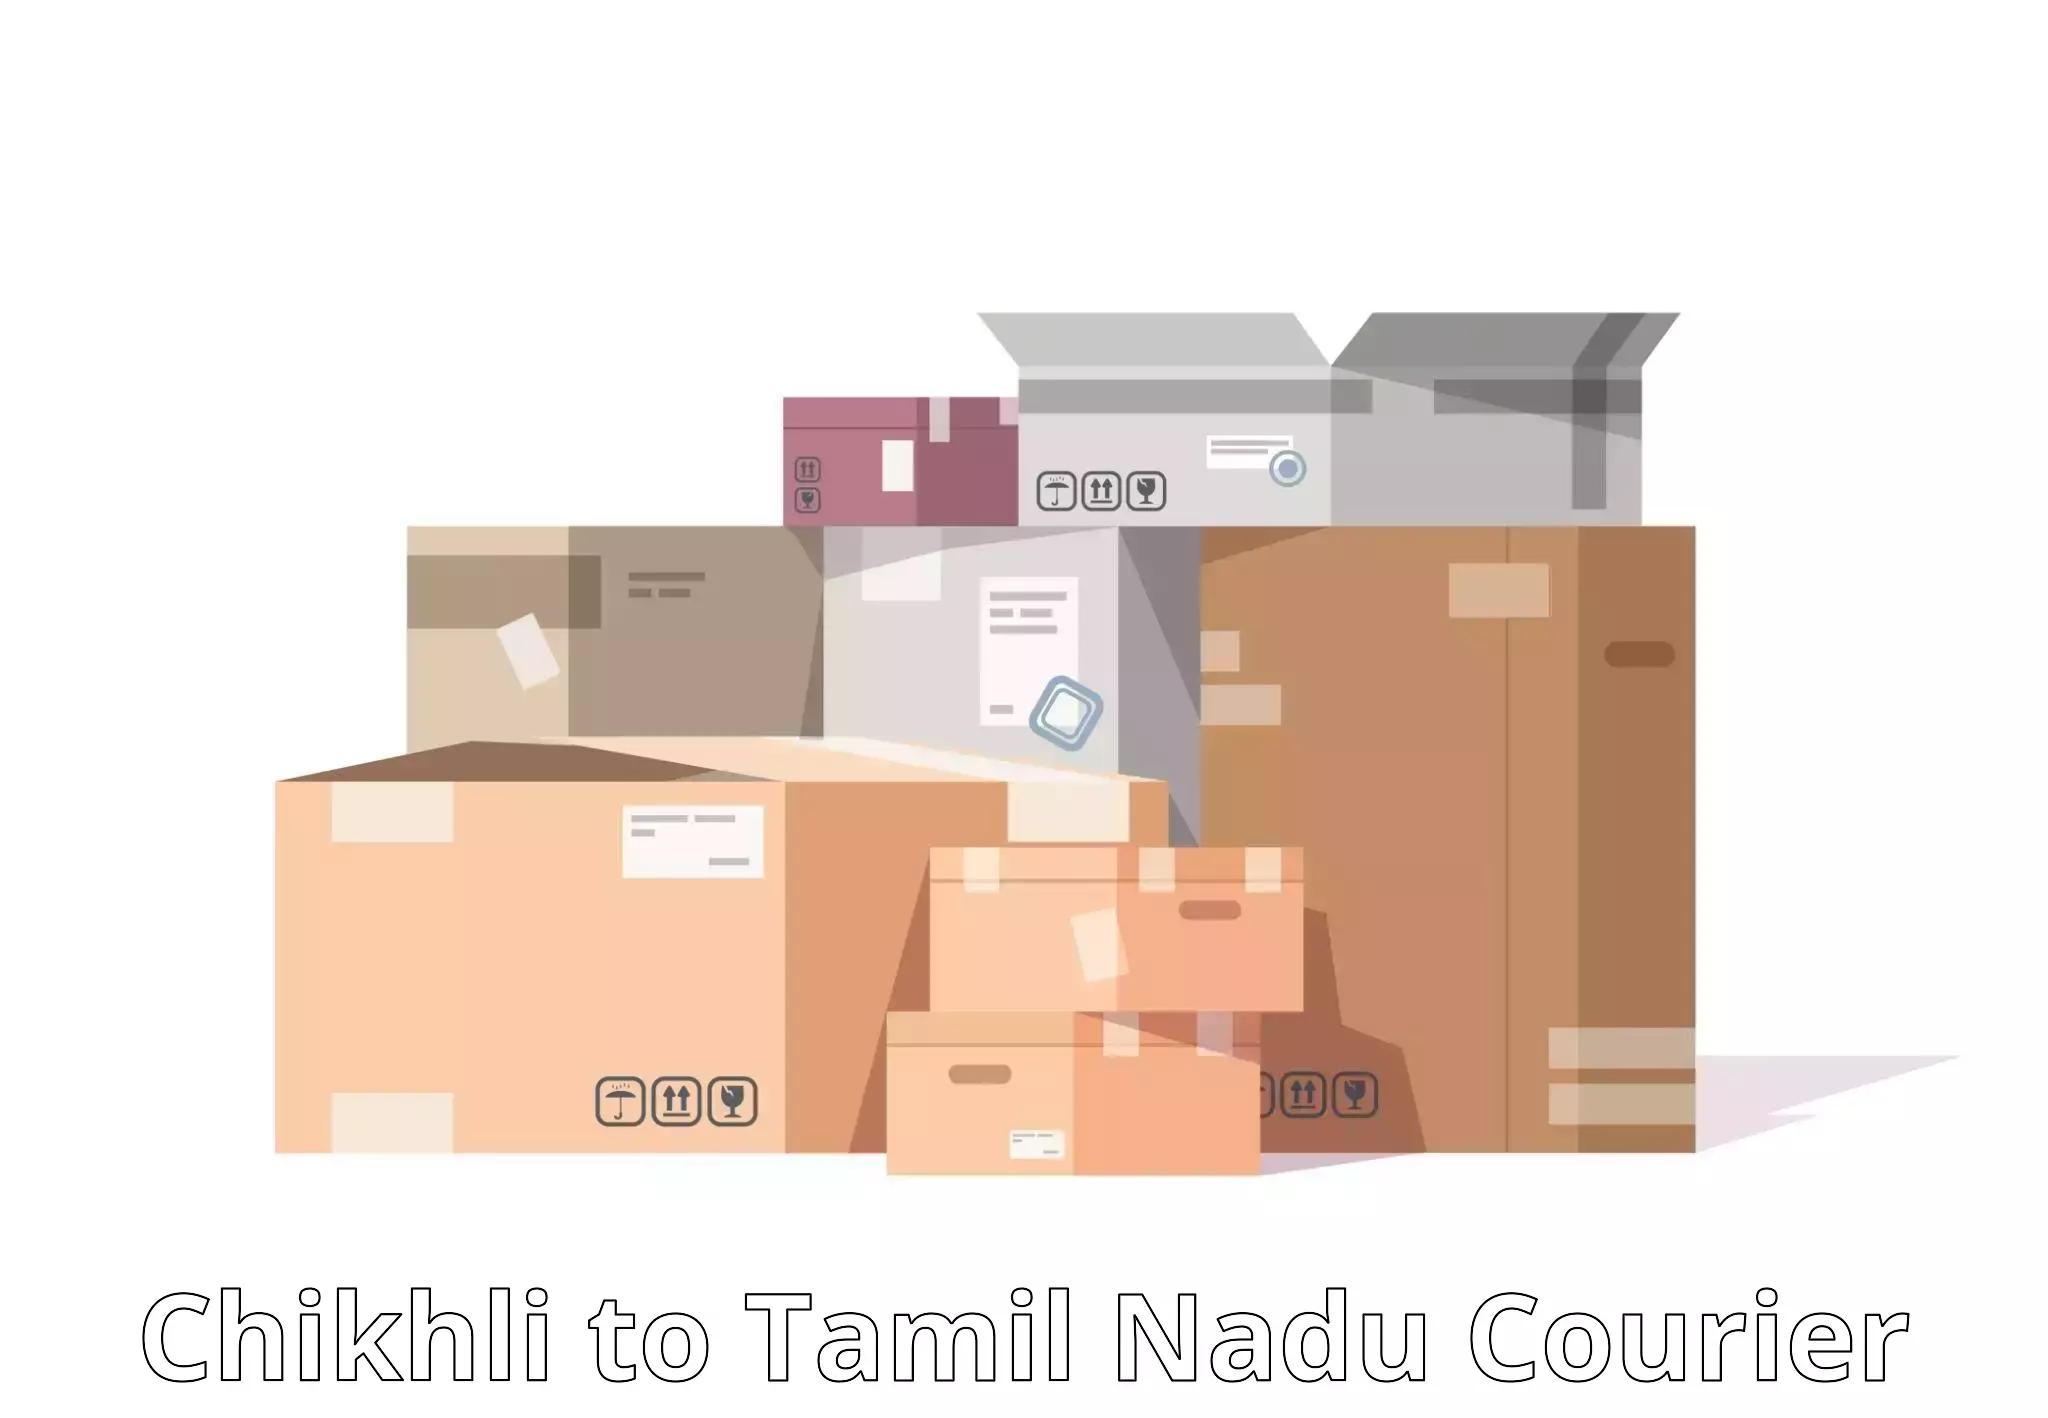 Express courier capabilities Chikhli to Tamil Nadu